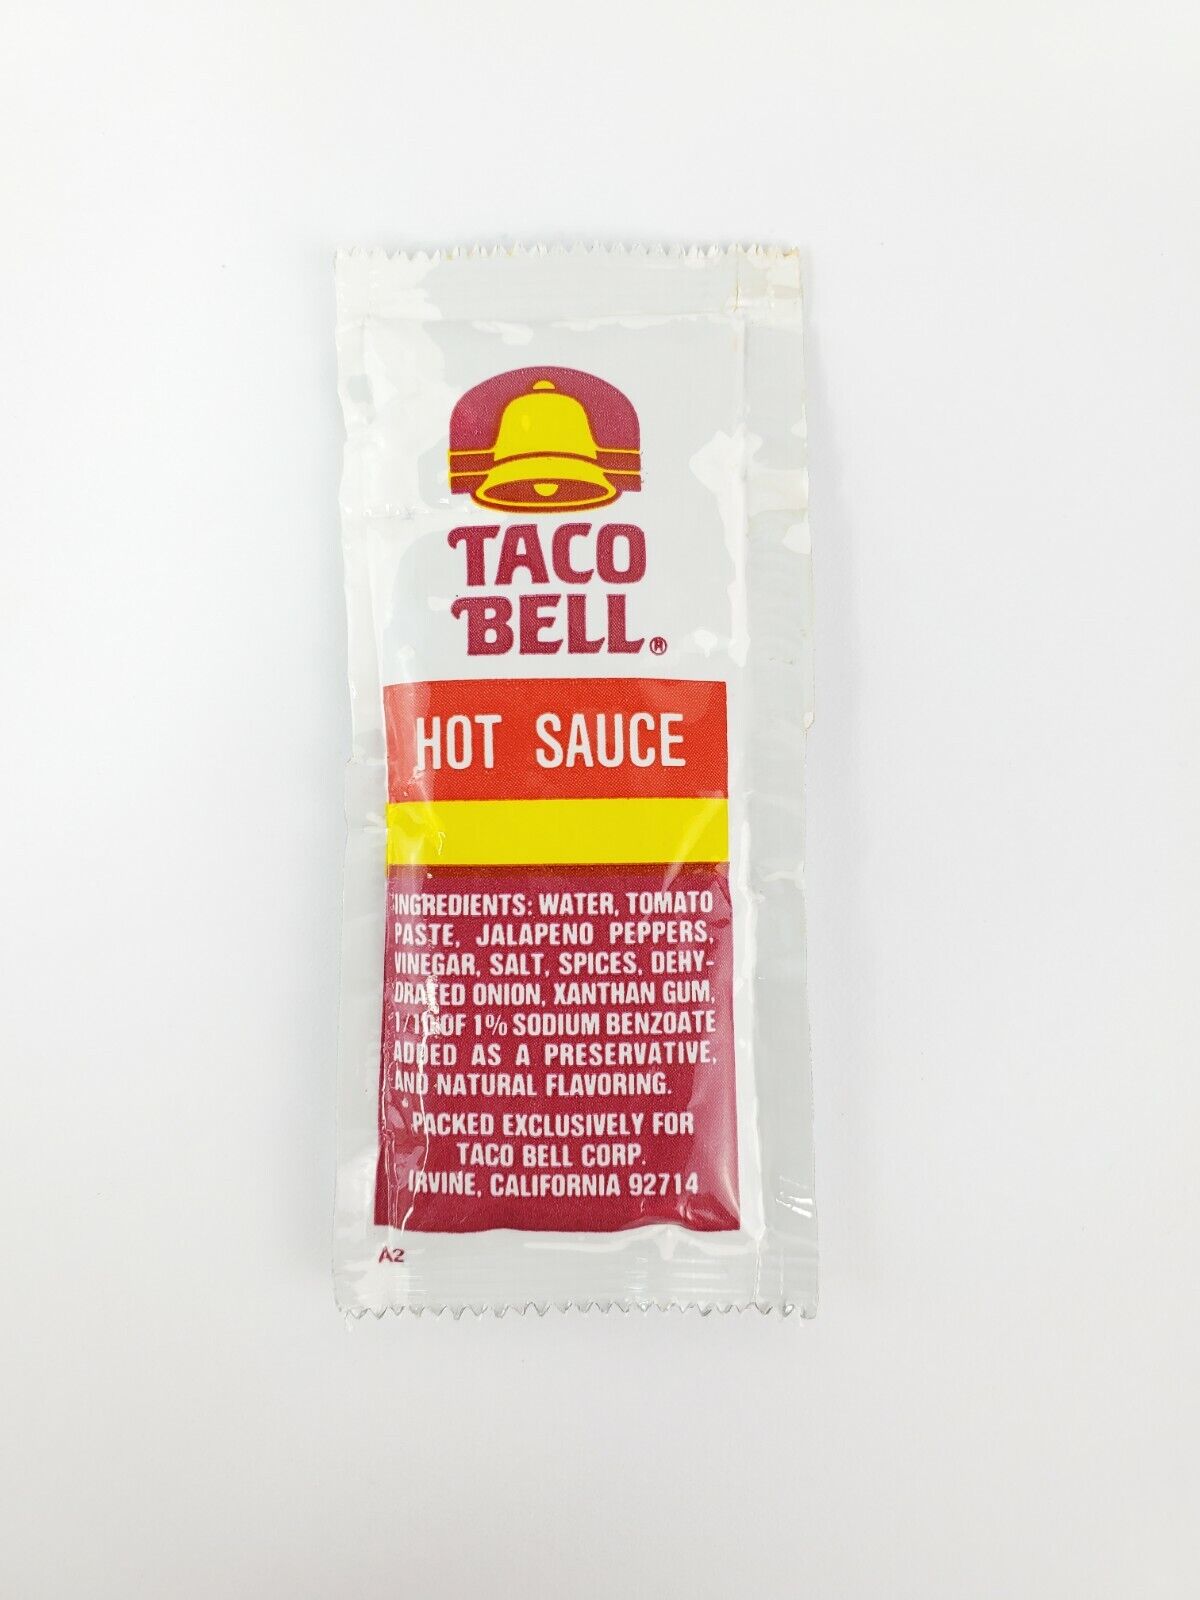 VINTAGE TACO BELL HOT SAUCE PACKET RETRO FAST FOOD QUIERO MINT CONDITION 